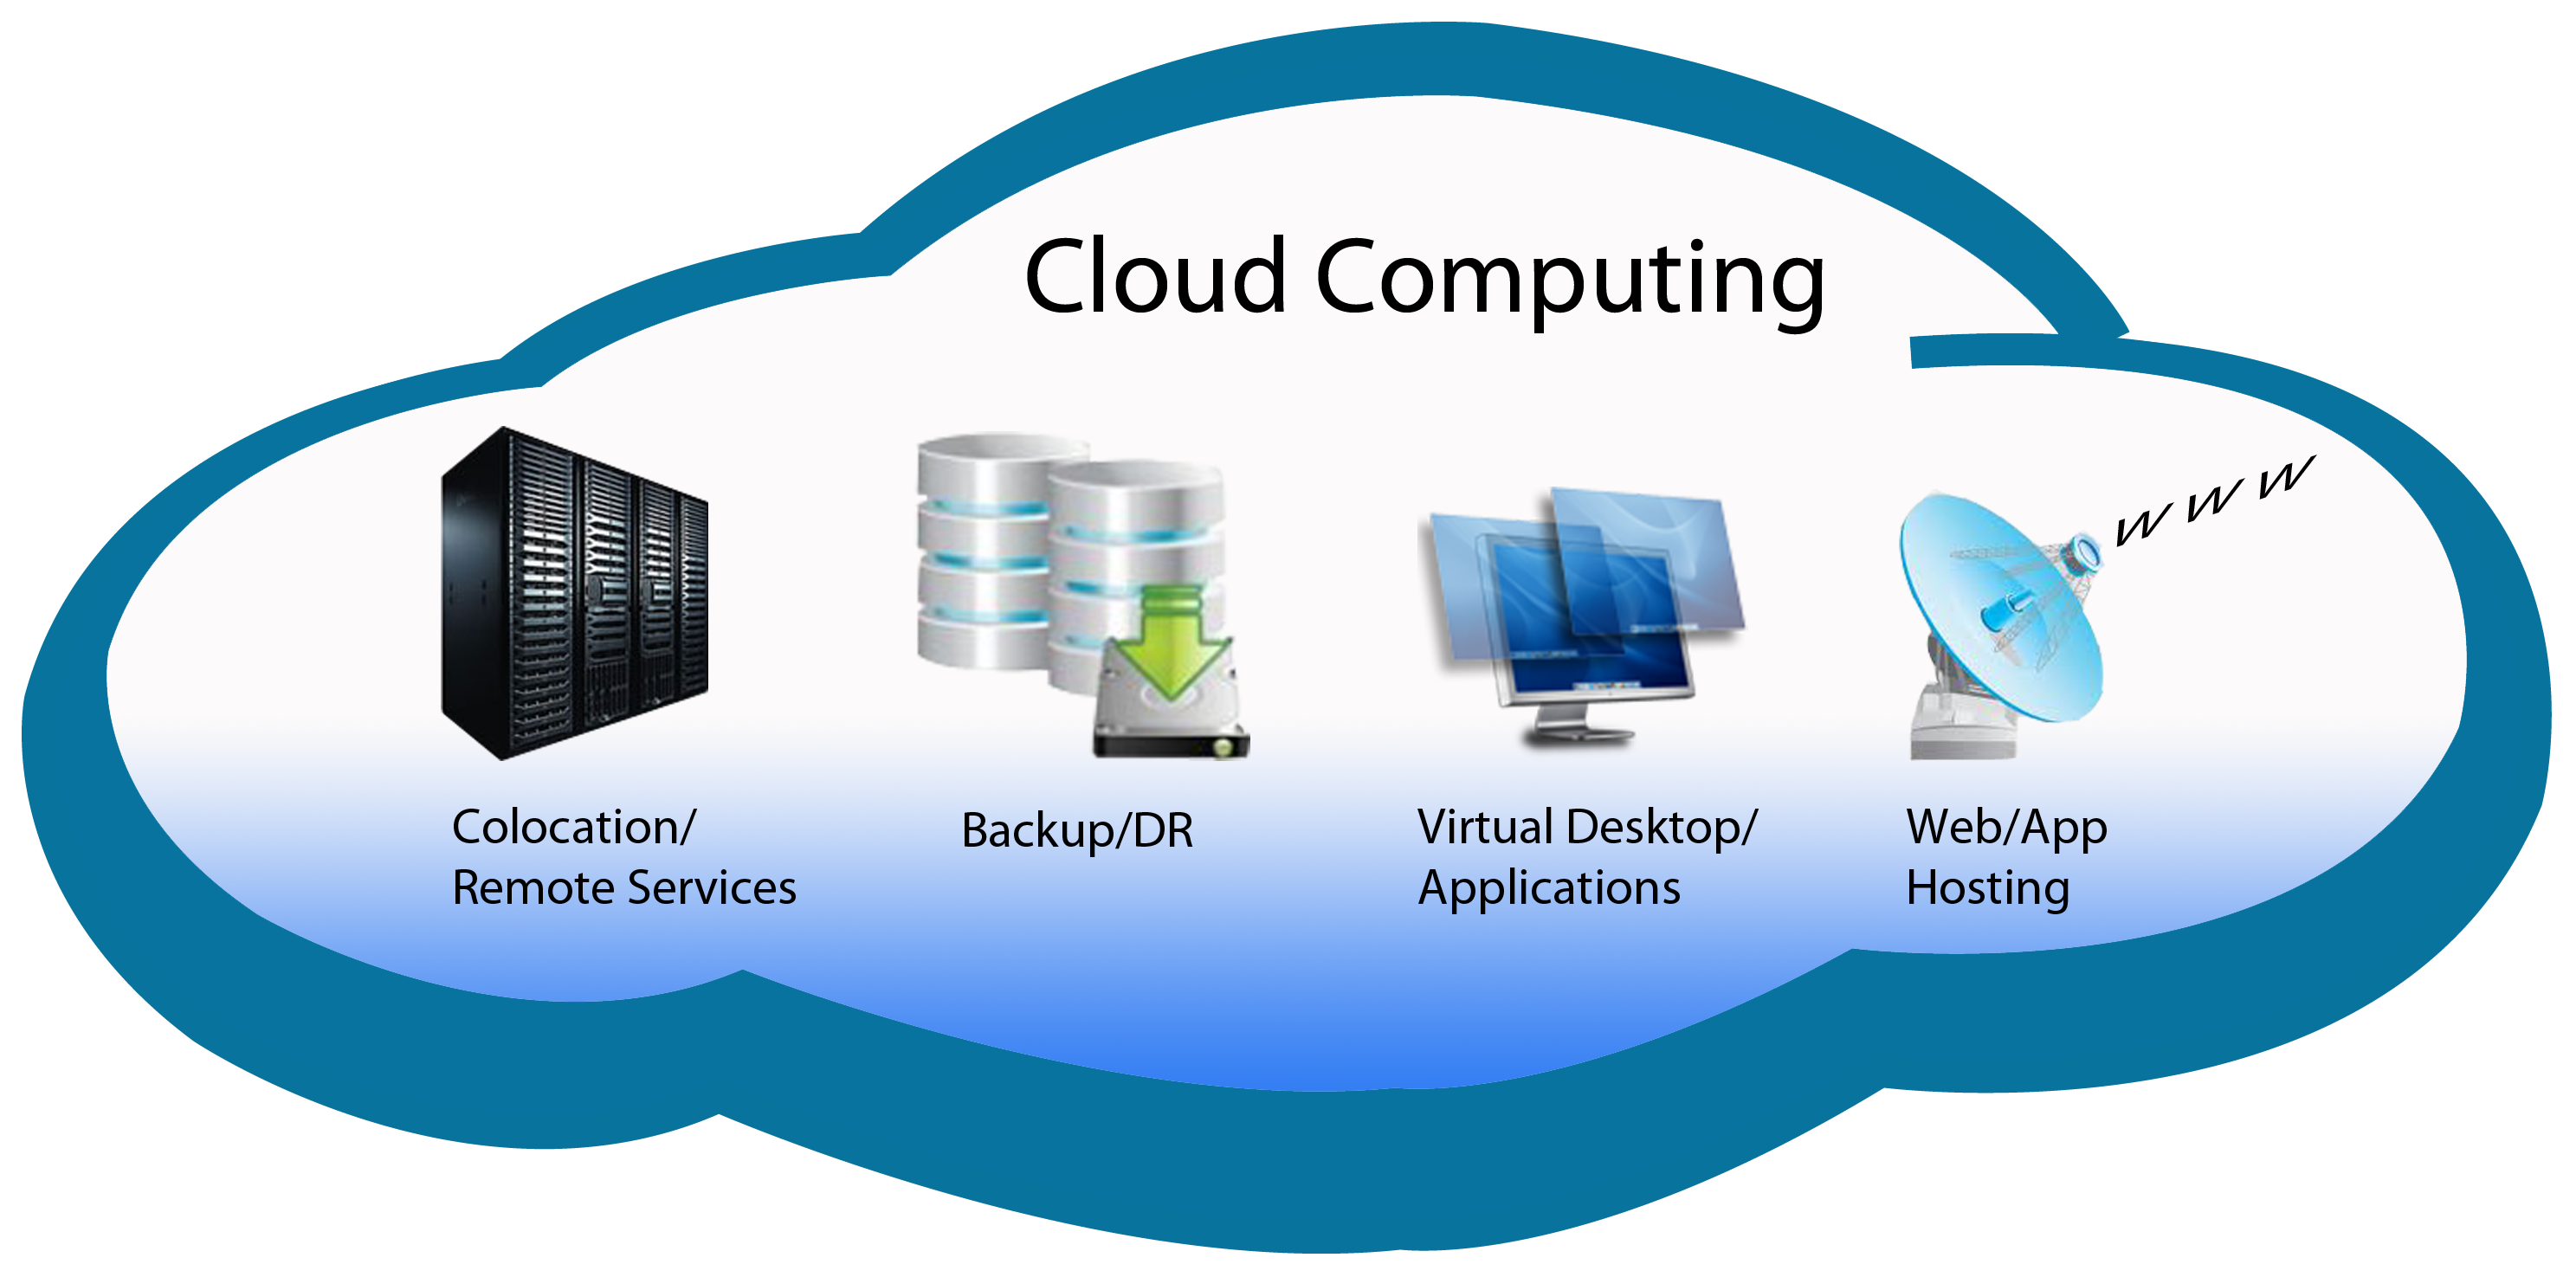 Which Cloud Computing Model Offers Applications On A Pay-Per-Use Basis